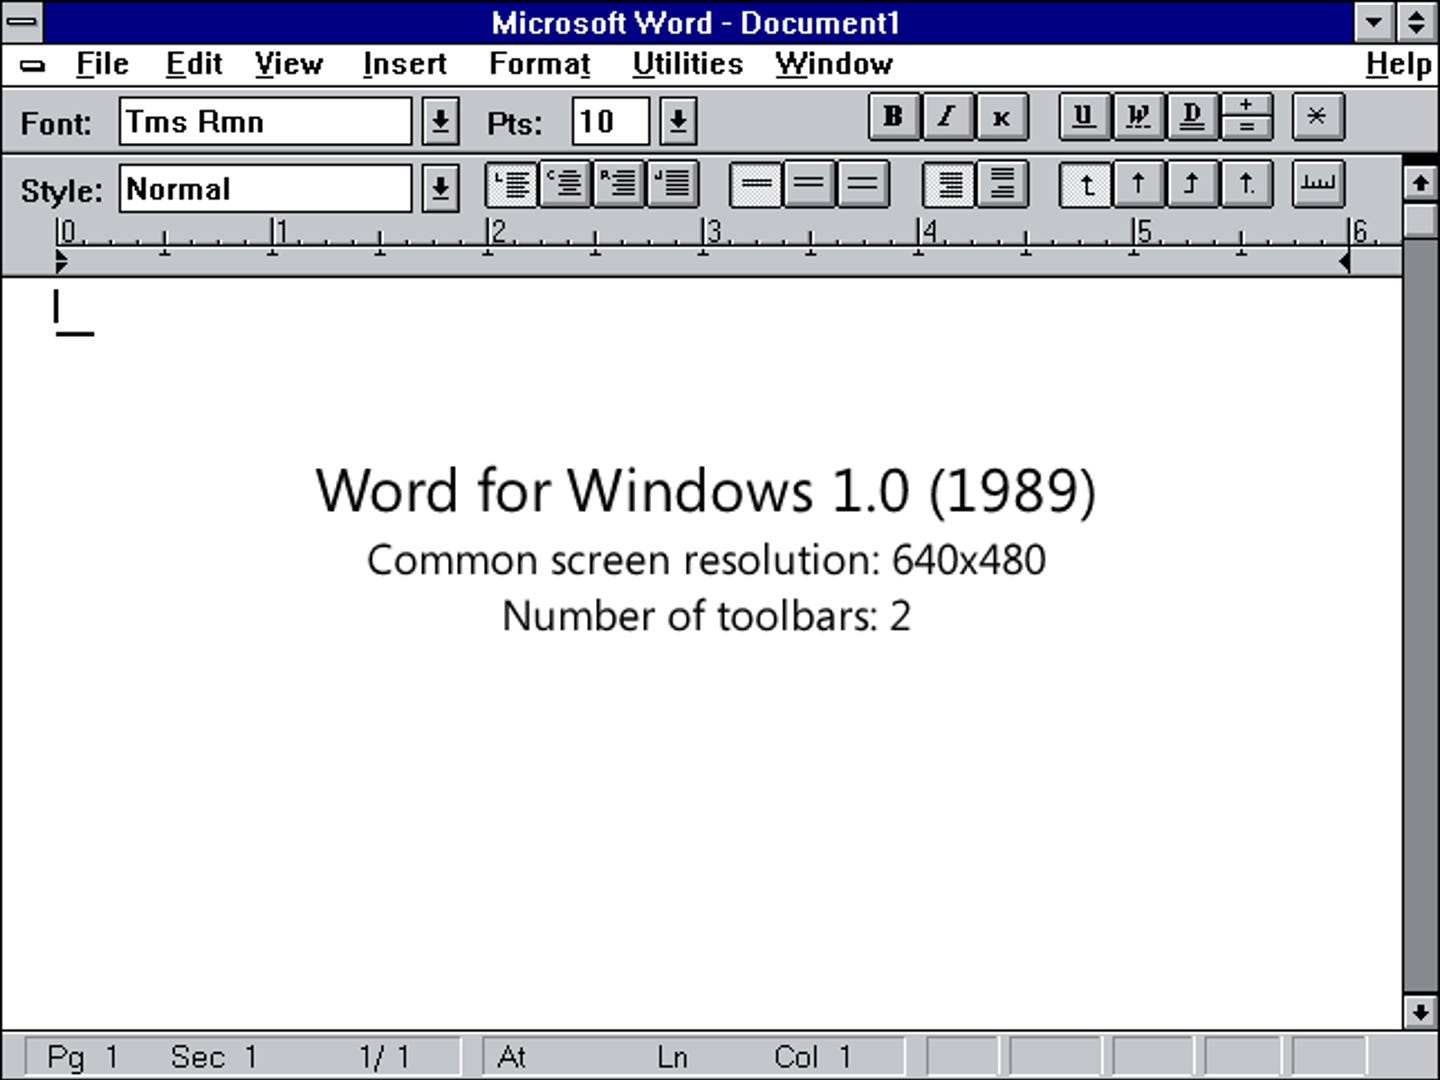 Word for Windows 1.0 (1989) Common screen resolution: 640x480 Number of toolbars: 2